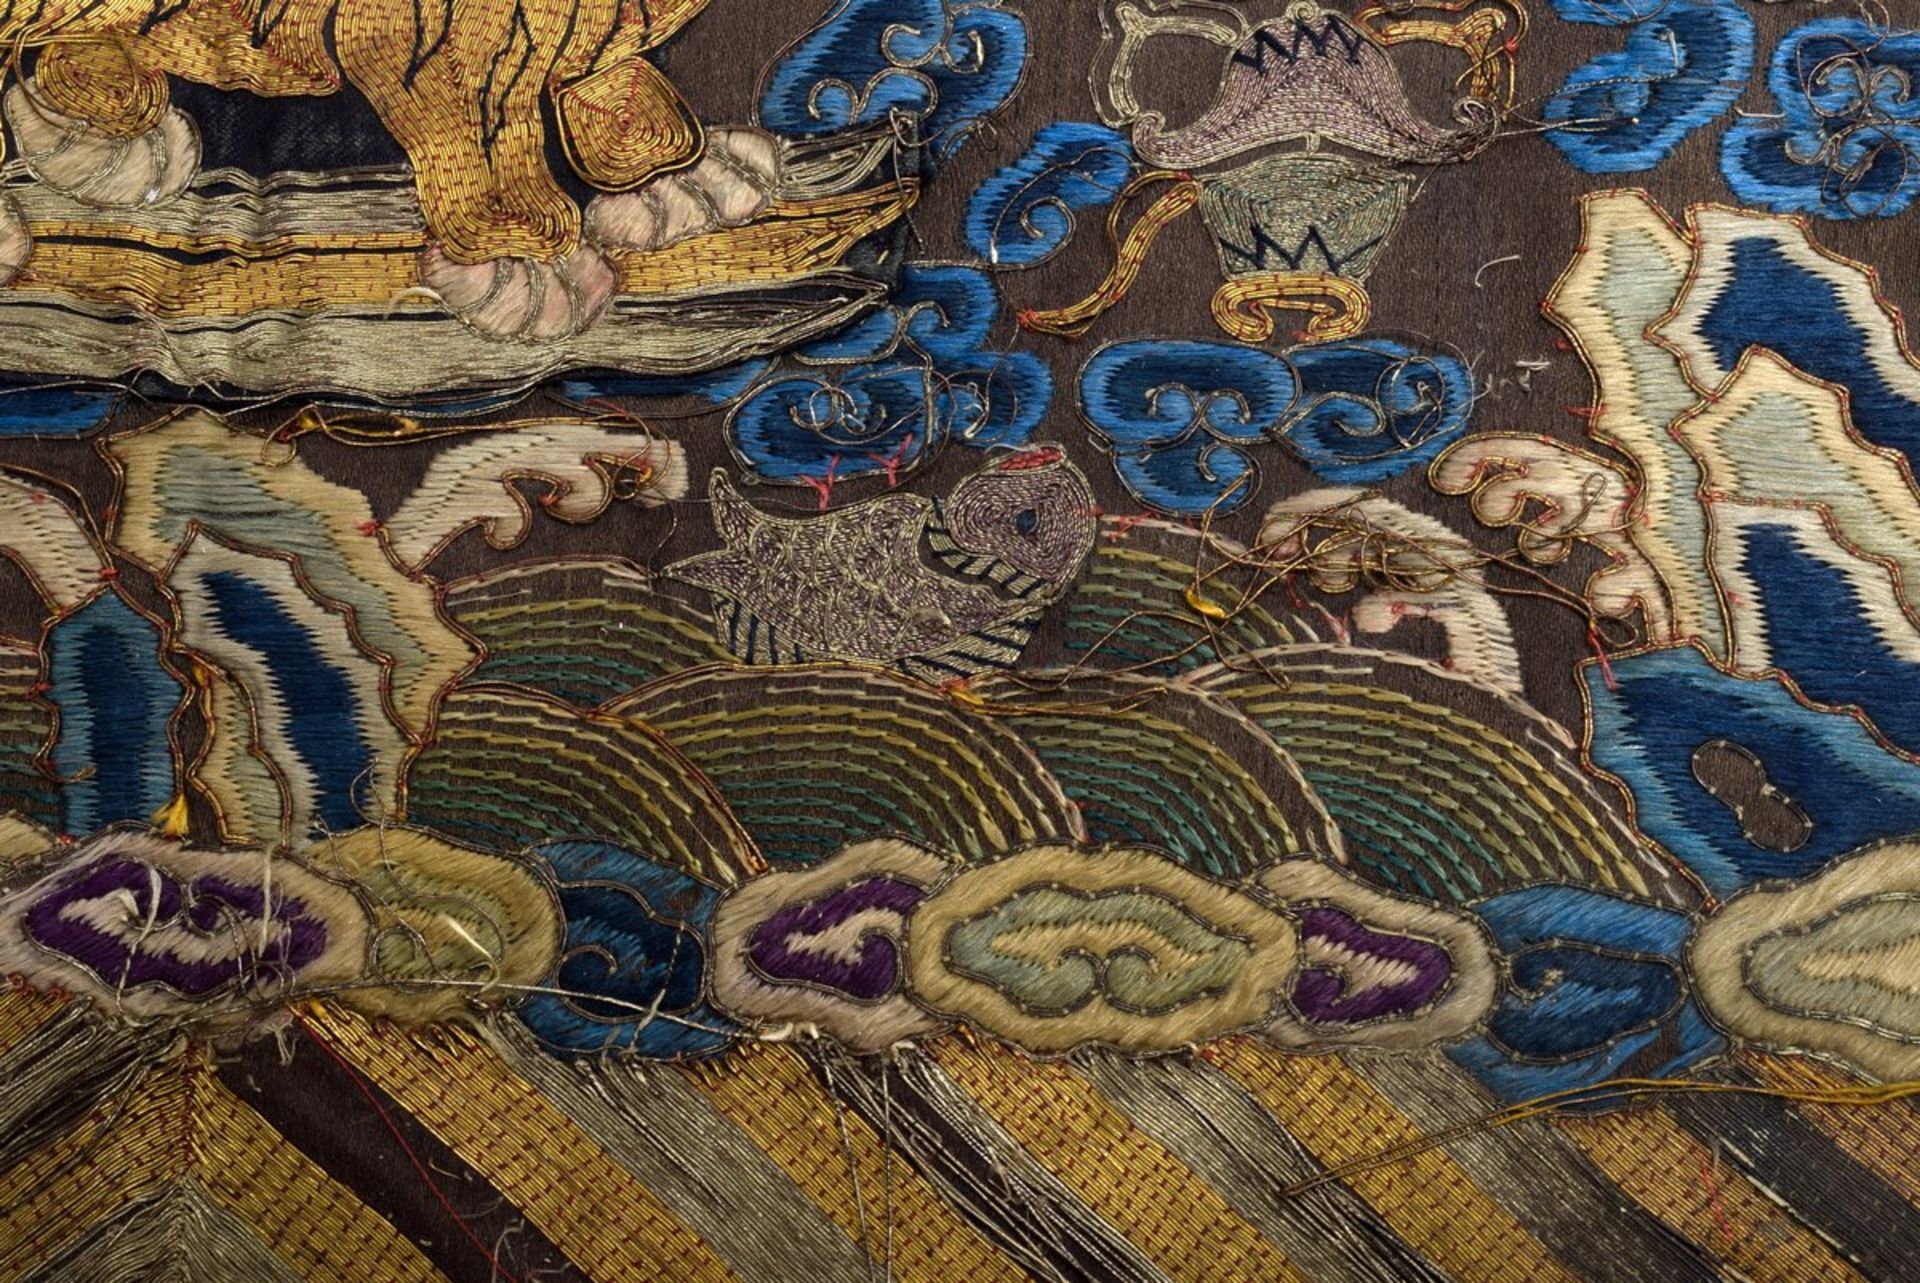 Mandarin insignia "Tiger", 4th military rank, Qing Dynasty, China 19th century, silk with gold thre - Image 4 of 7